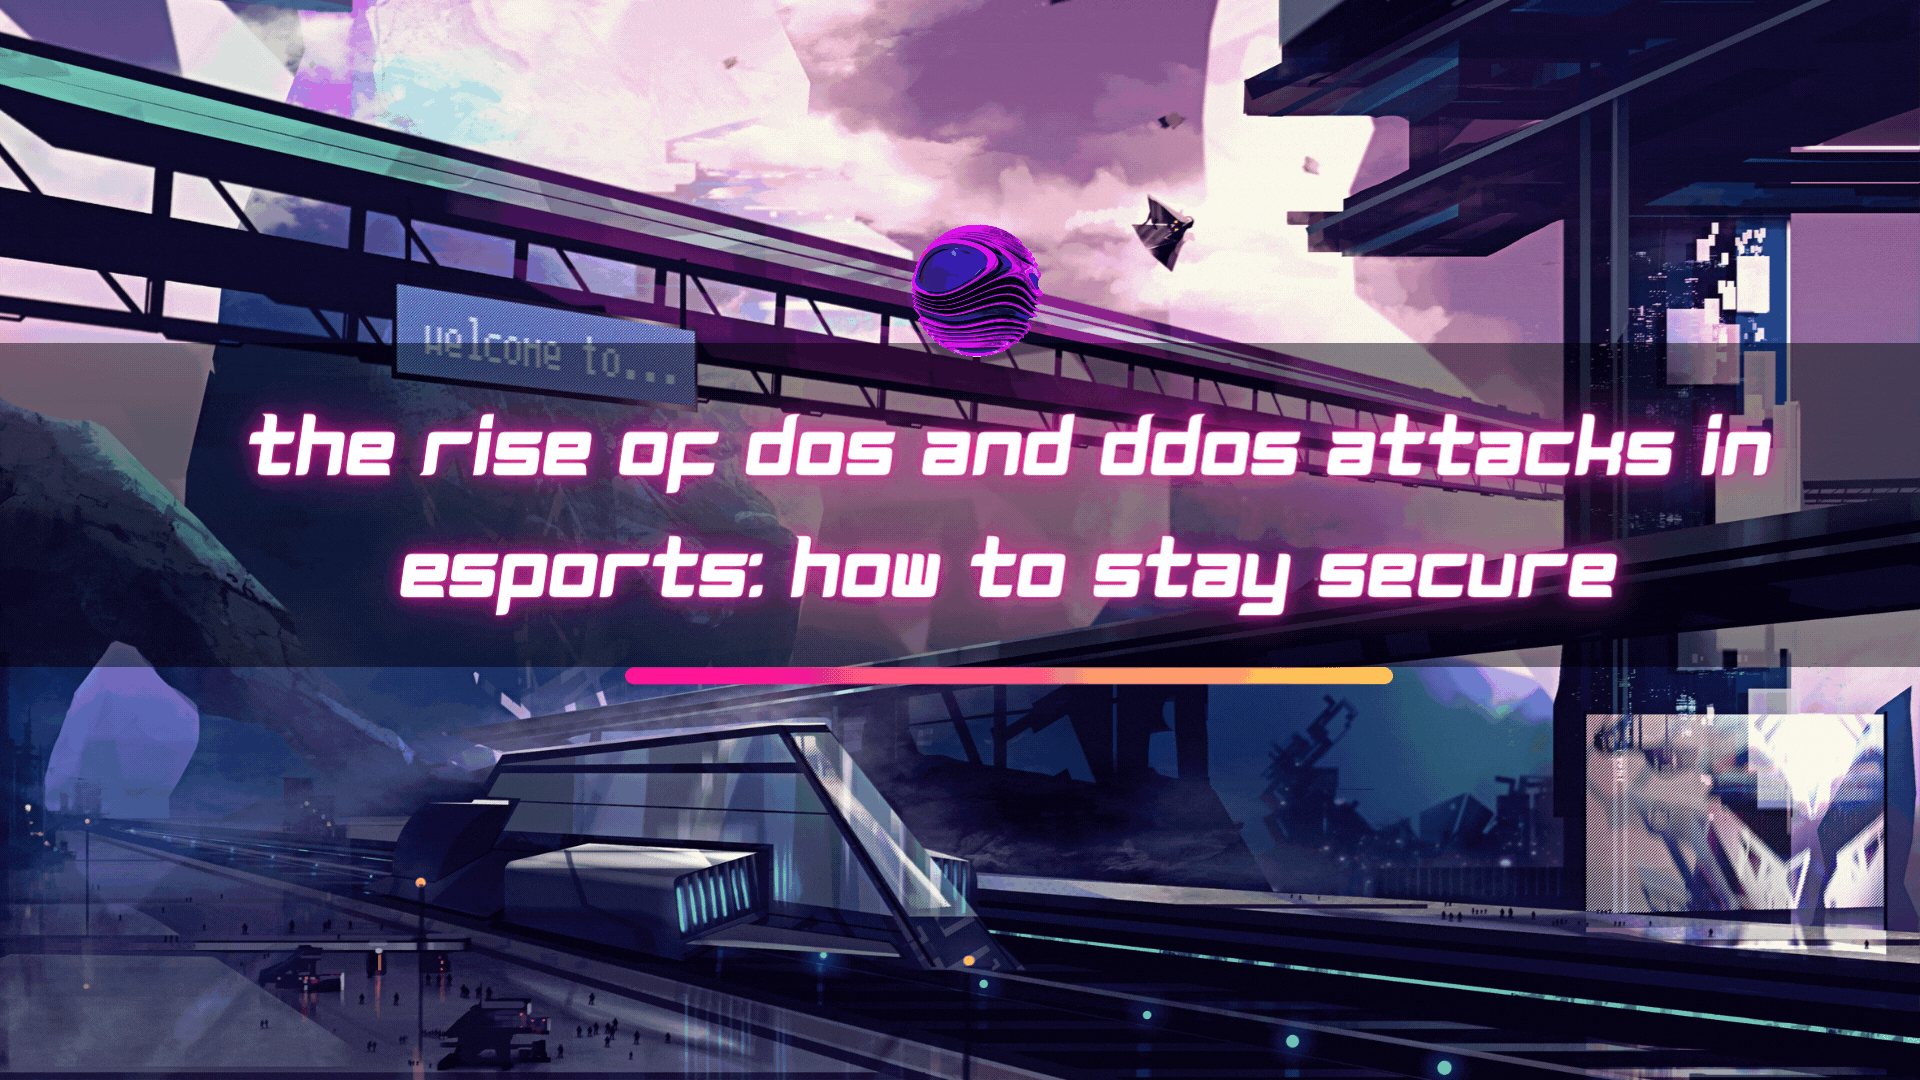 The Rise of DoS and DDoS Attacks in Esports How to Stay Secure